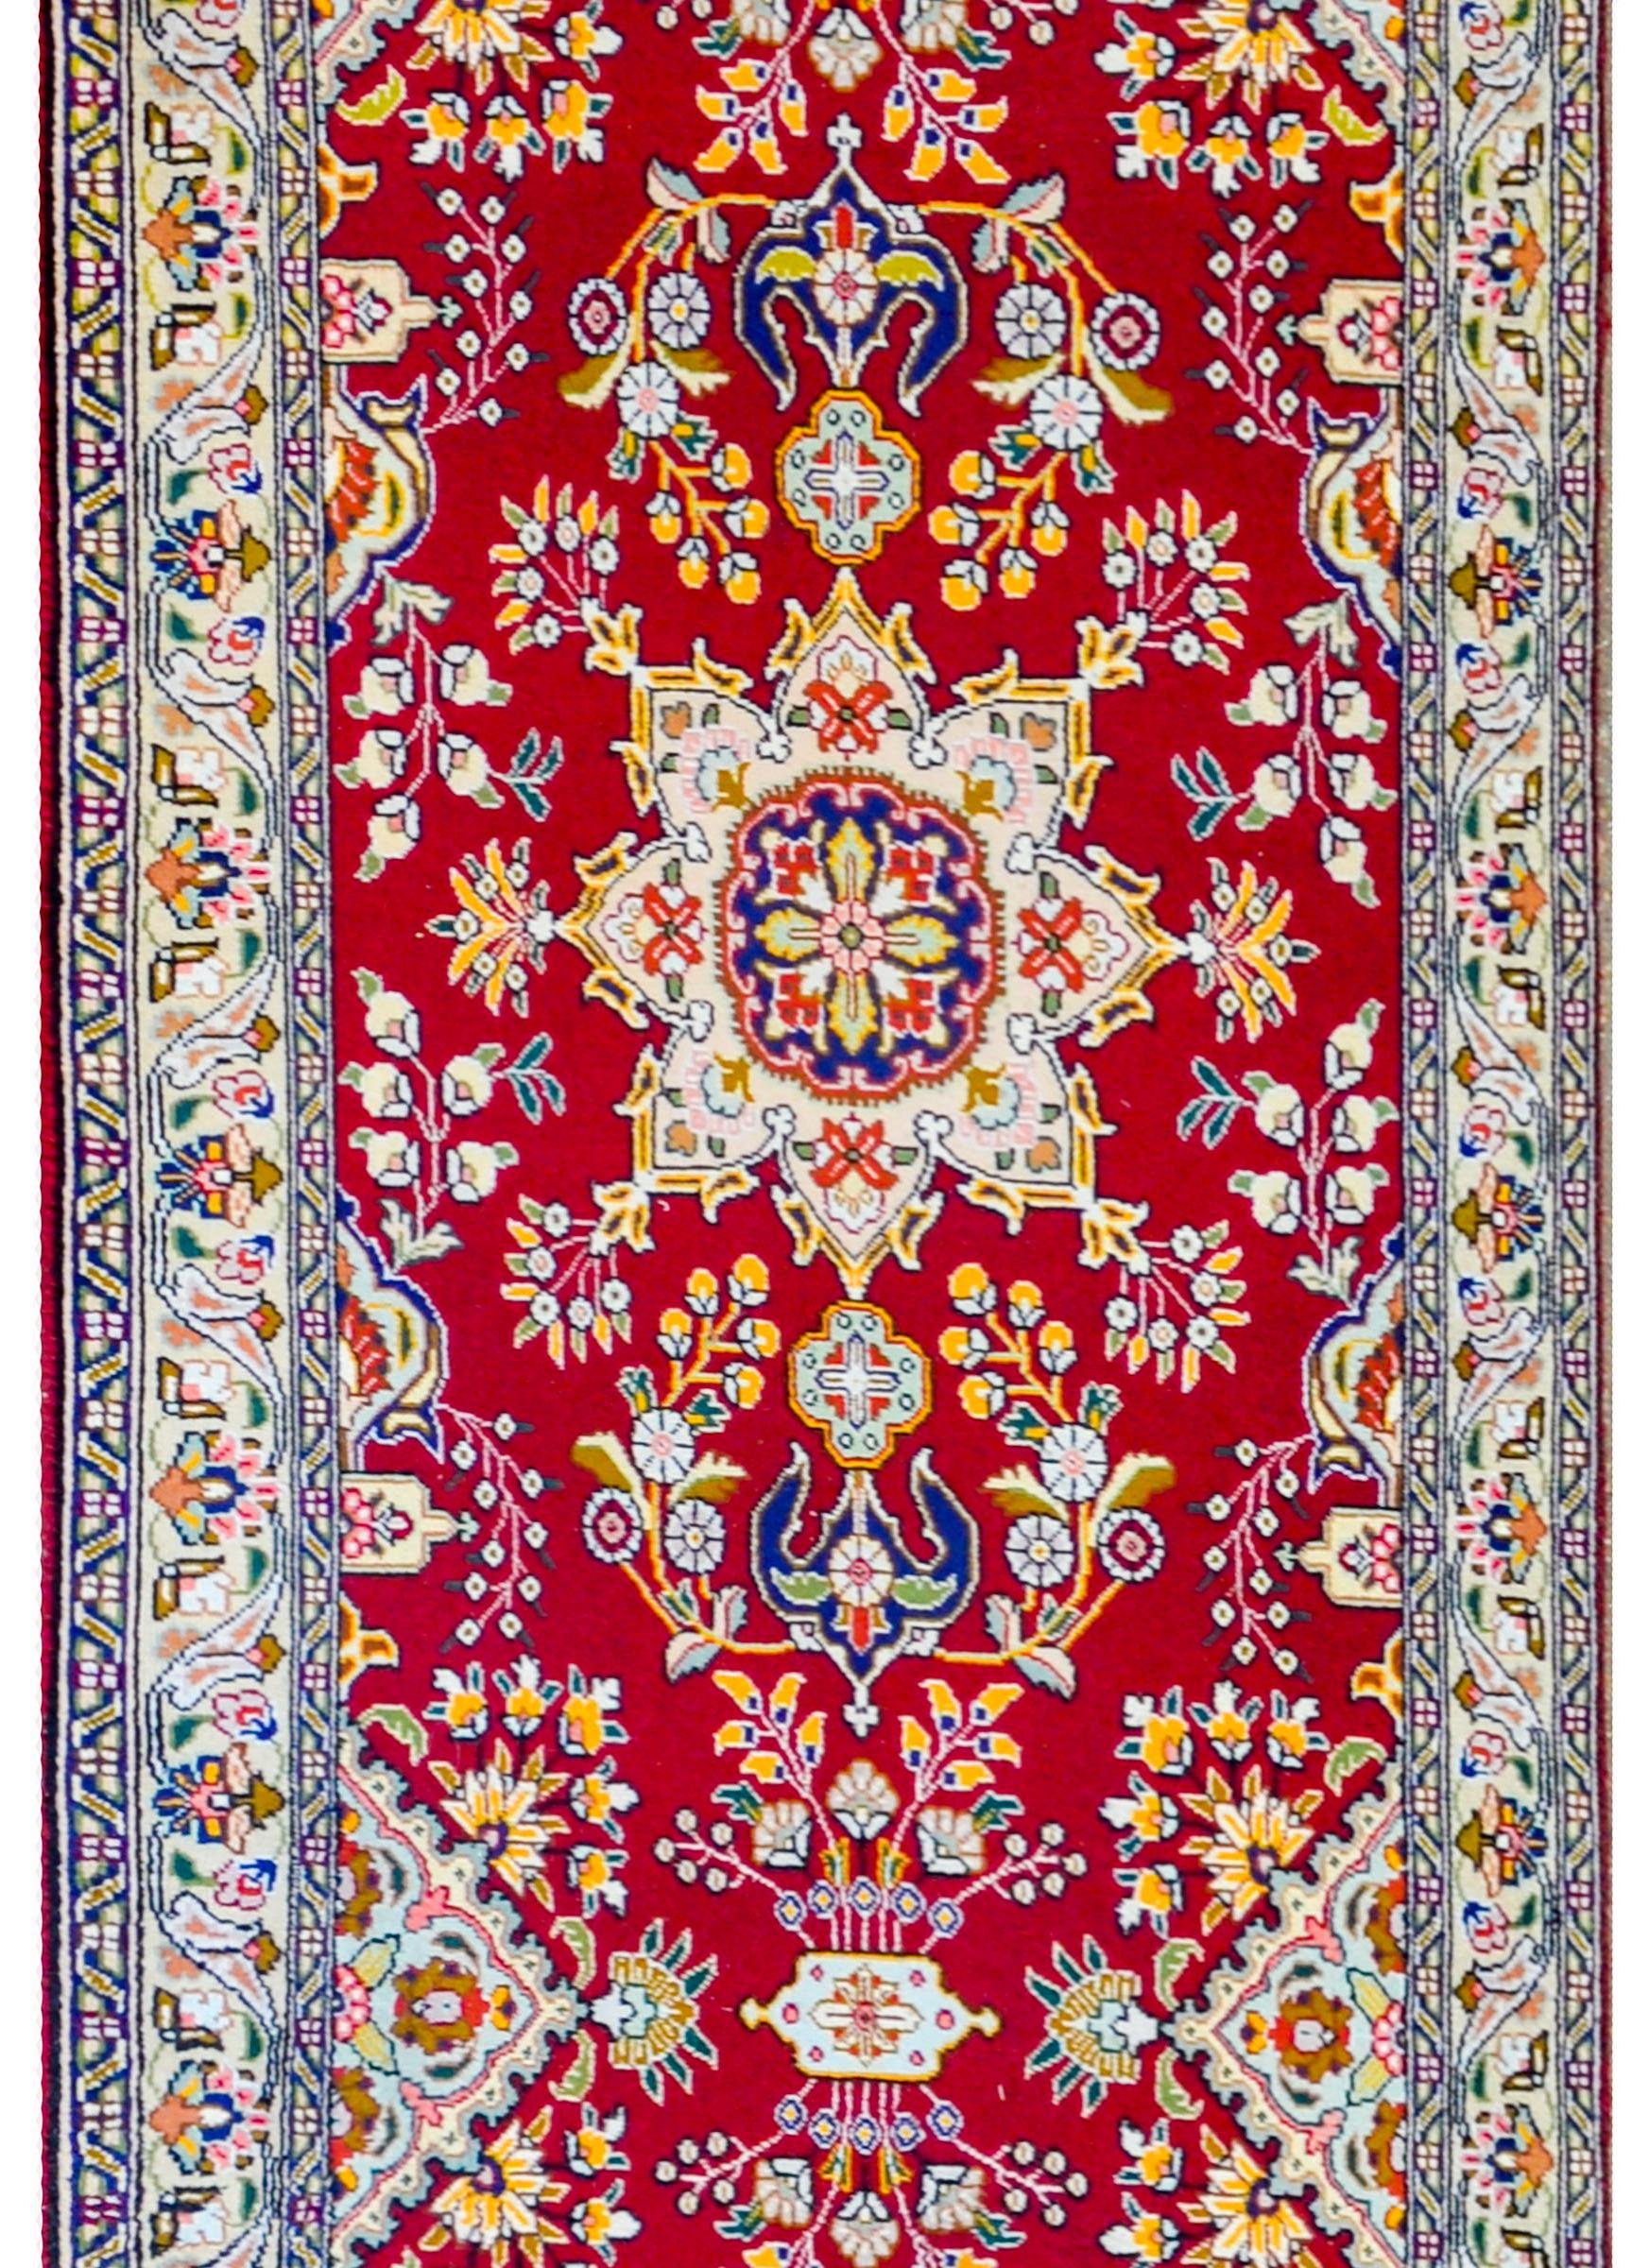 A beautiful mid-20th century Persian Tabriz runner with several large-scale medallions woven in indigo, gold, green, pink and cream colored wool amidst a field of myriad flowers, on a crimson background. The border is sweet with a petite-scales